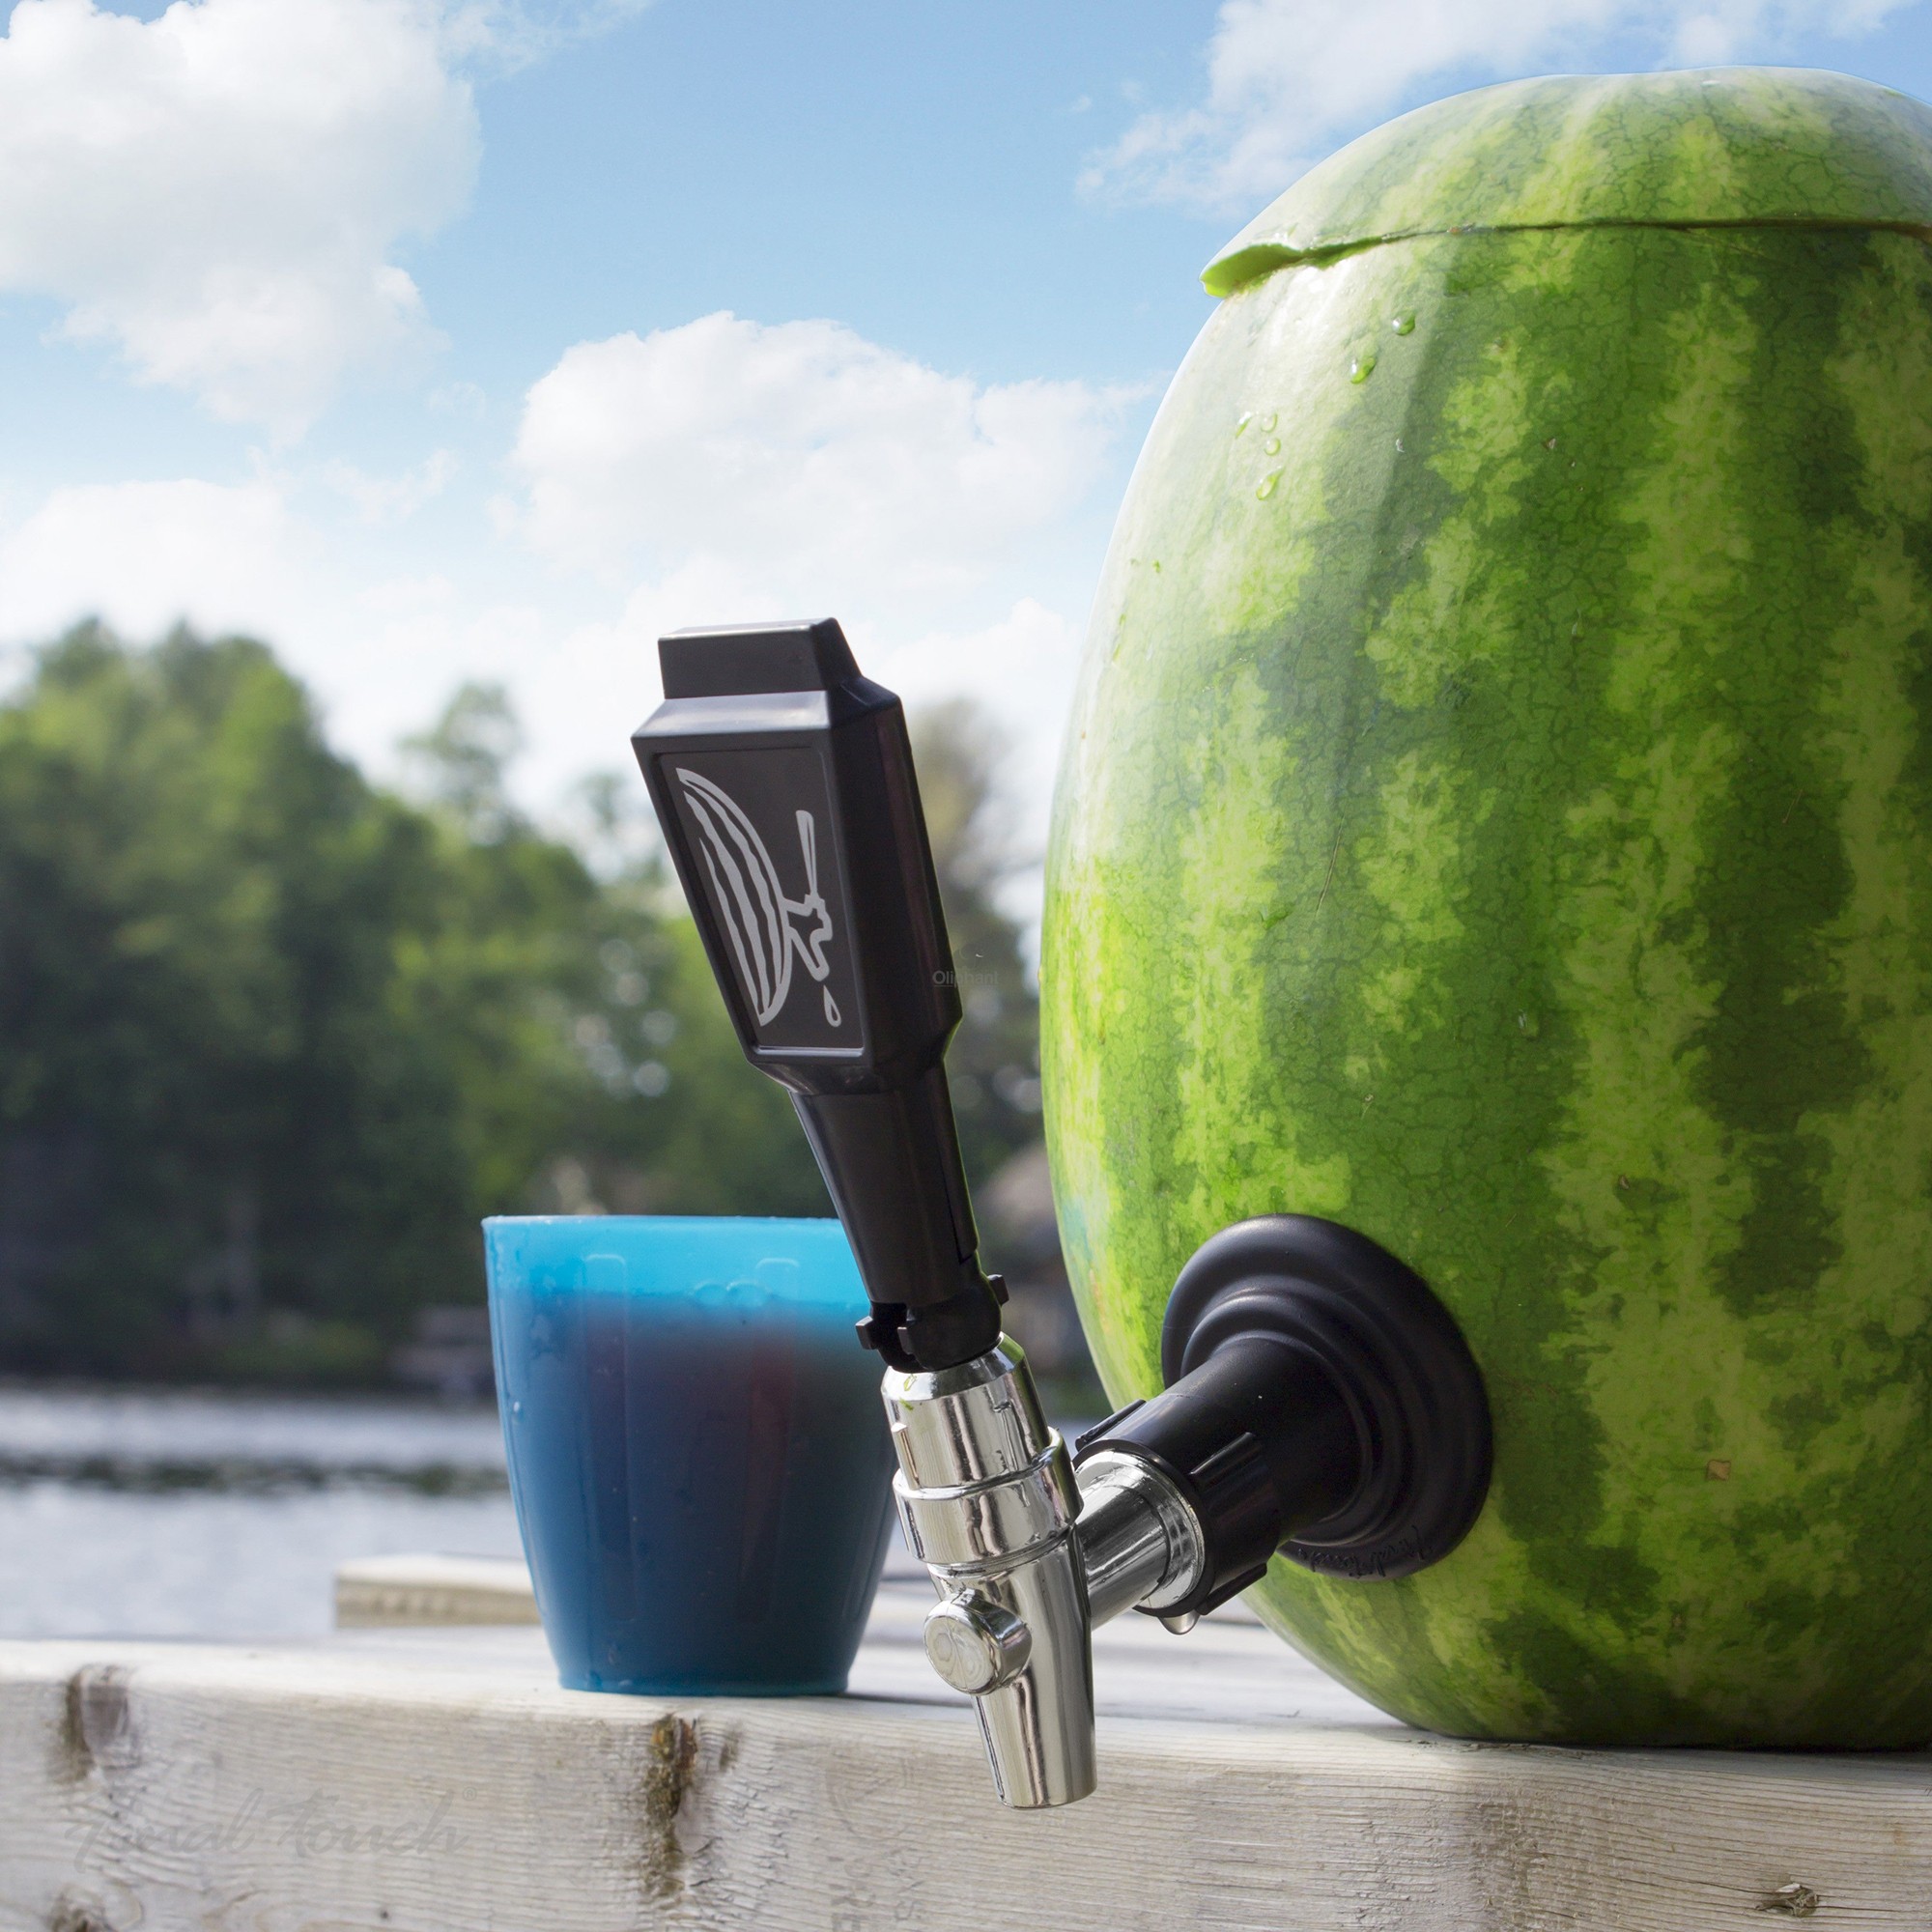 Final Touch Watermelon and Pumpkin Keg Tapping Kit